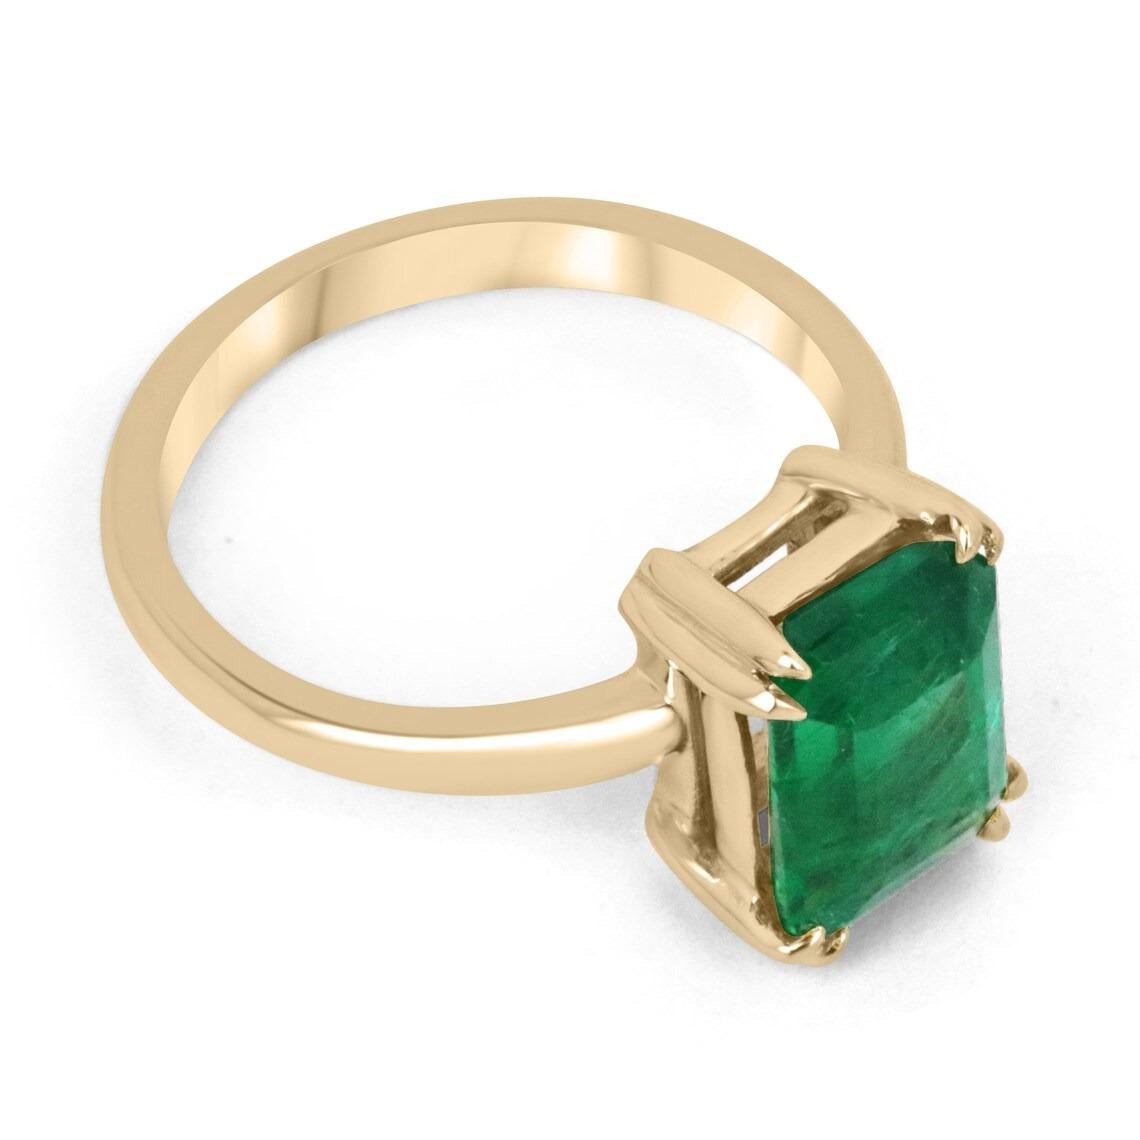 Displayed is a classic emerald solitaire engagement or right-hand ring. This spectacular piece features a remarkable 3.05-carat, natural emerald cut emerald from the origins of Zambia. The center stone showcases a rich, rare, dark vivid green color